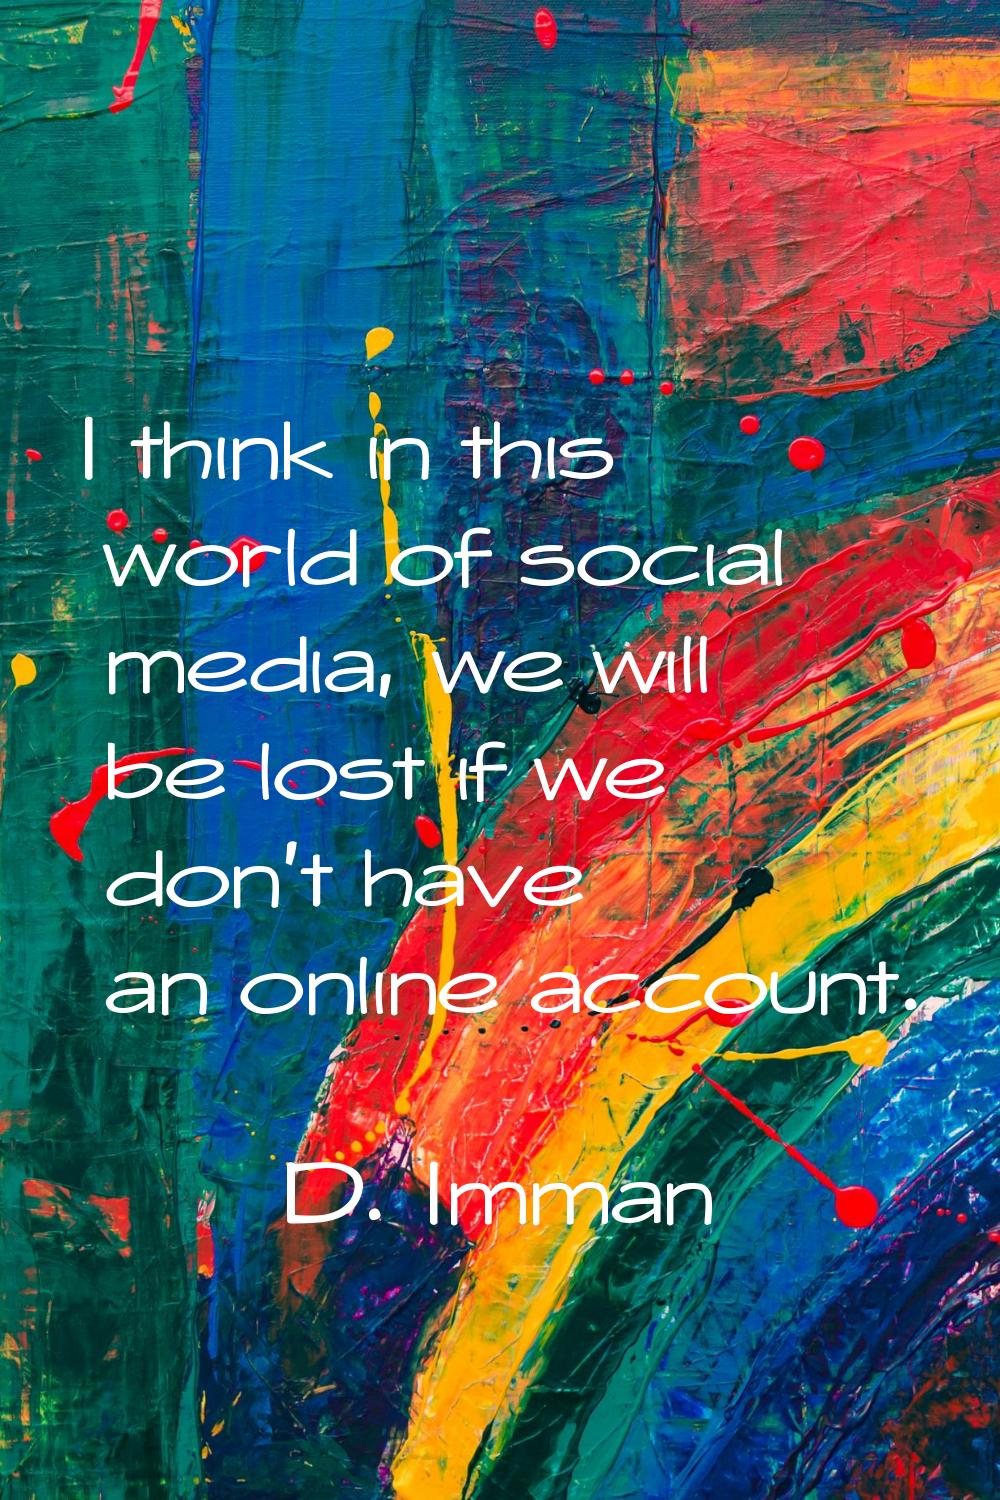 I think in this world of social media, we will be lost if we don't have an online account.